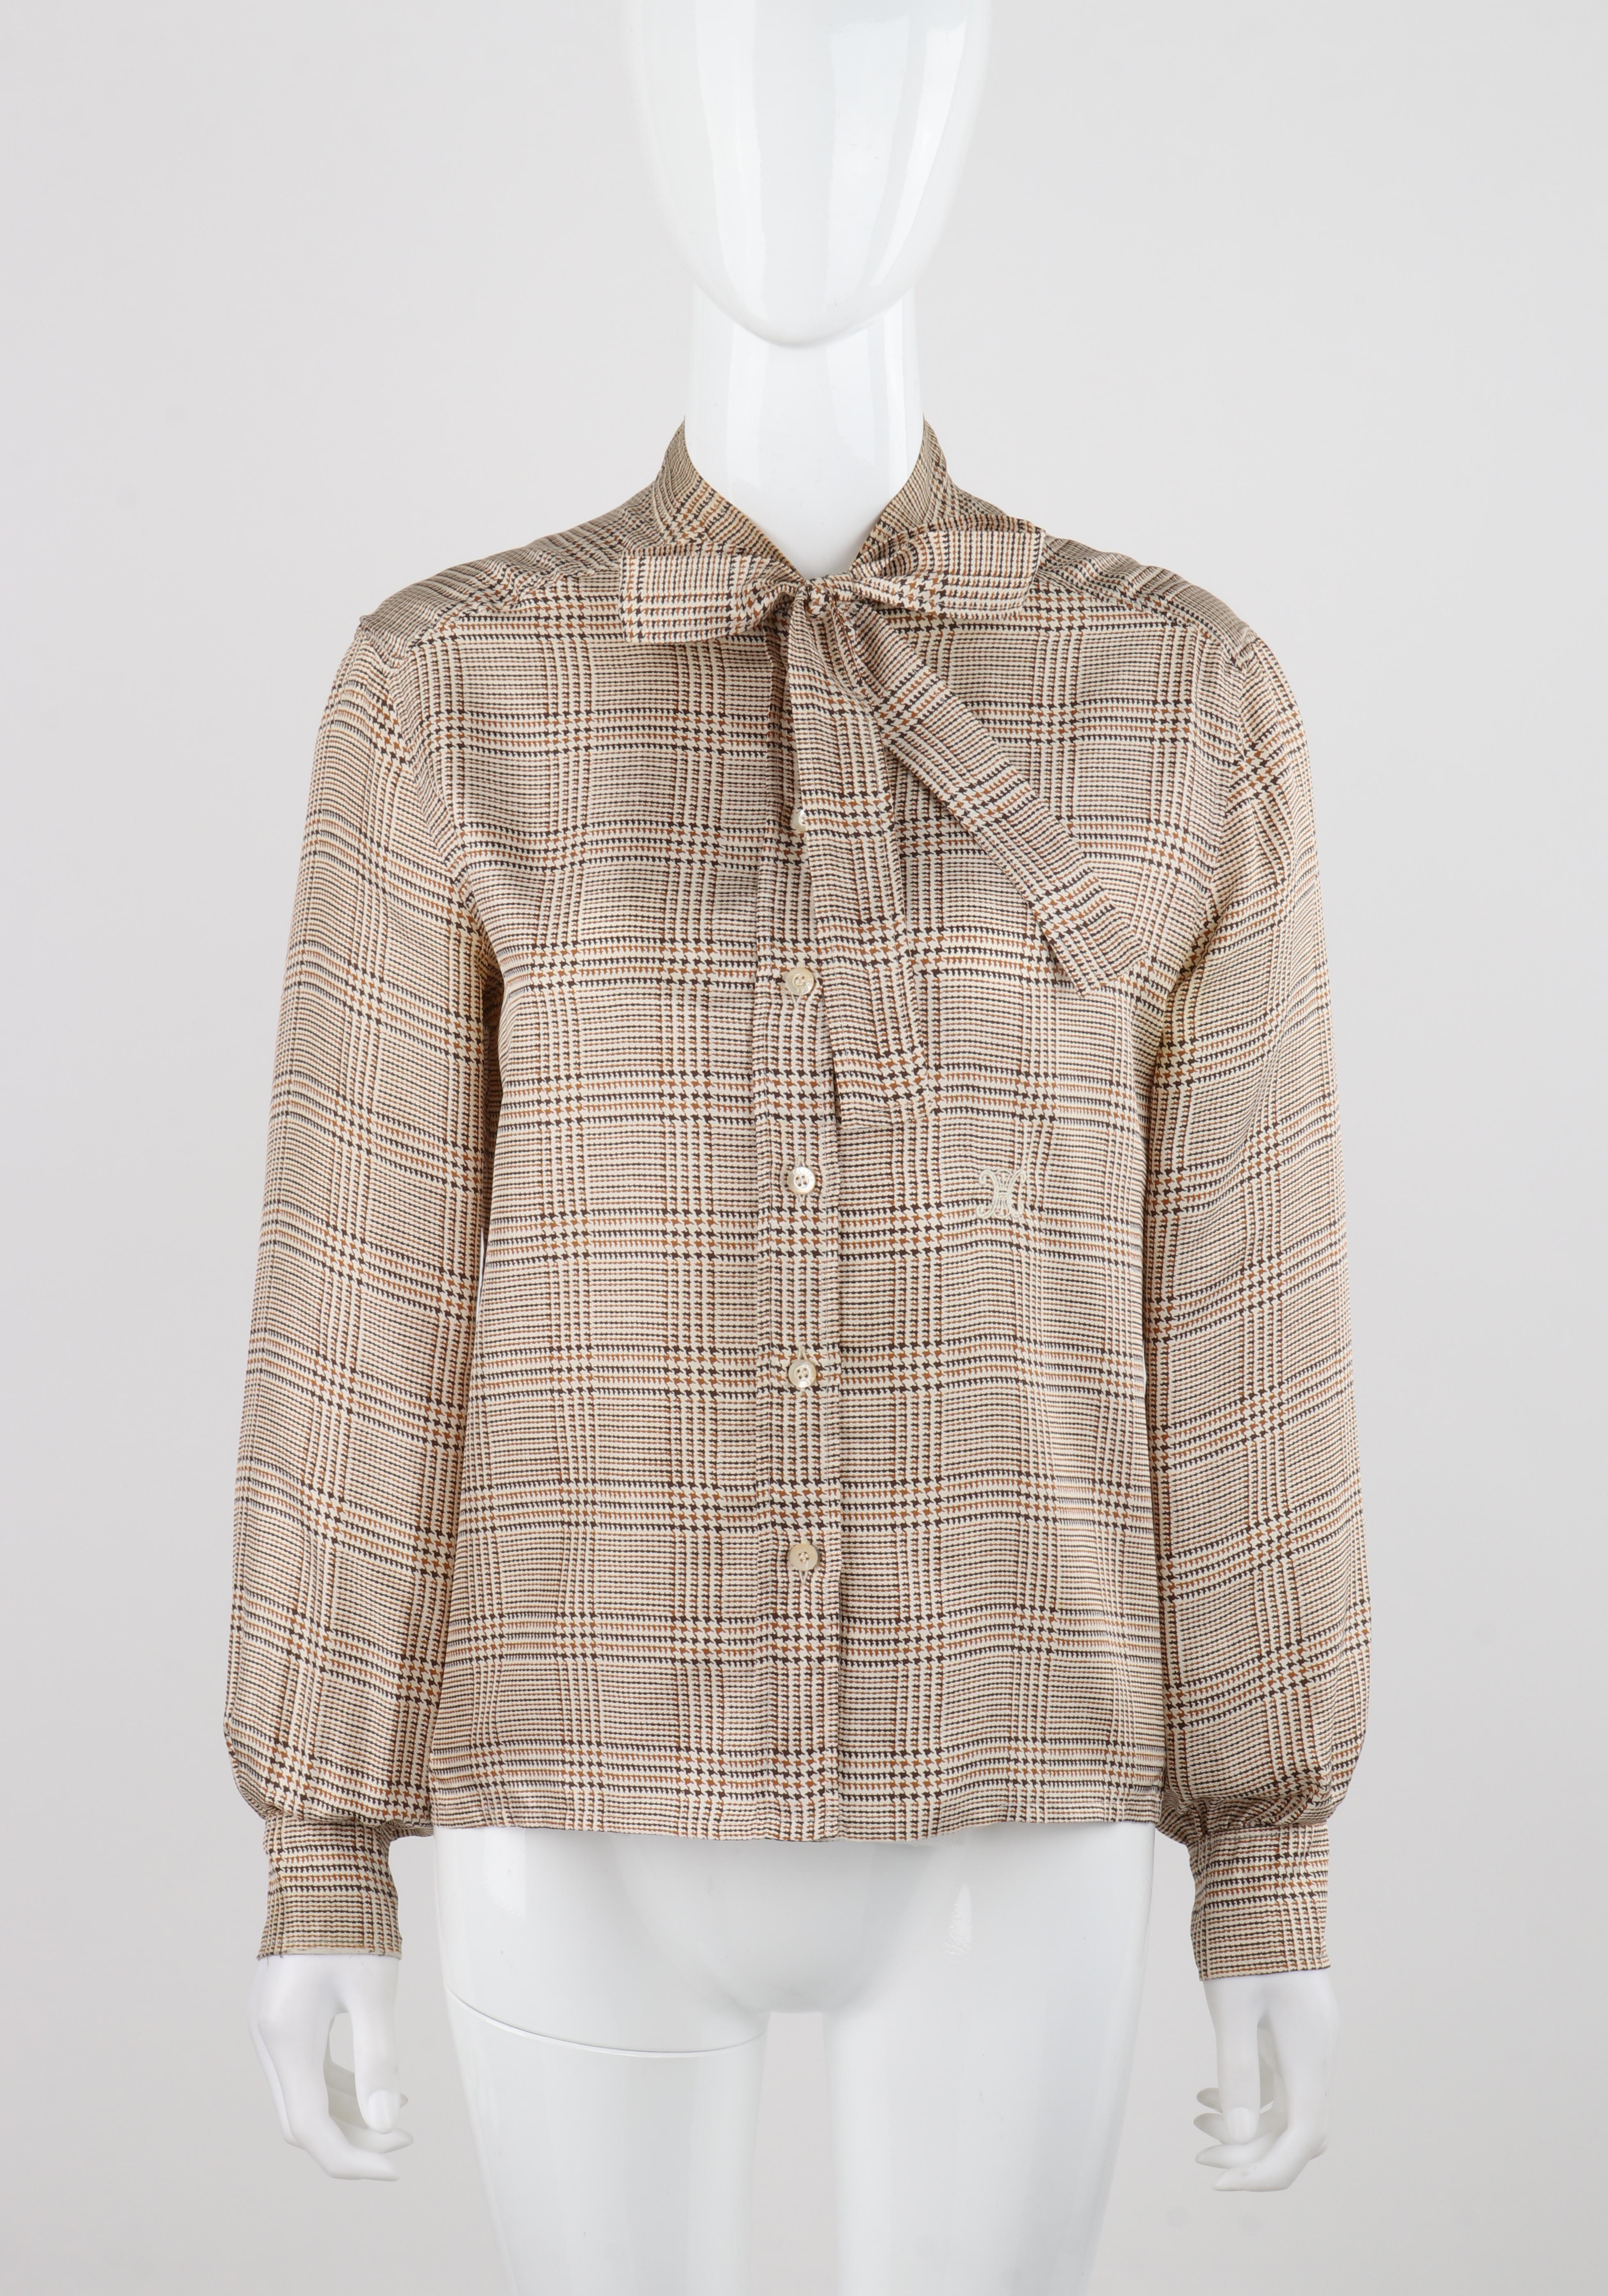 CELINE c.1970's Brown Tan Silk Houndstooth Print Pussybow Button Up Blouse Top In Good Condition For Sale In Thiensville, WI